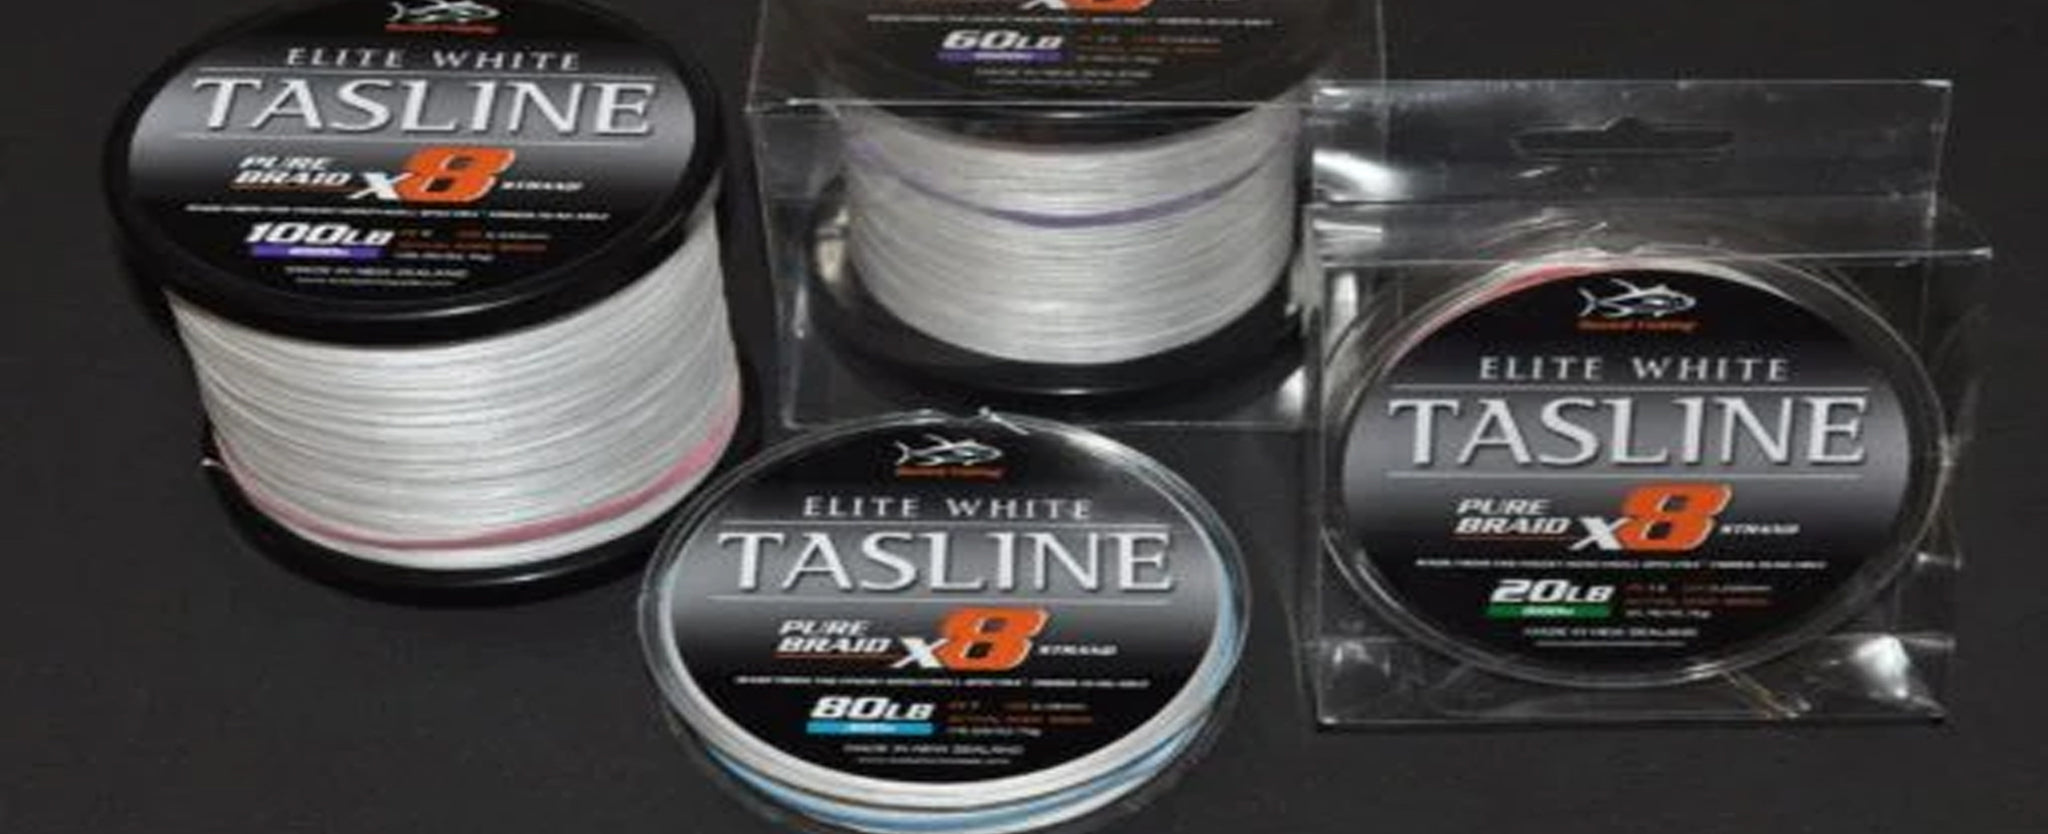 TASLINE - MADE IN NEW ZEALAND Available in TACKLE SMITH!!! 